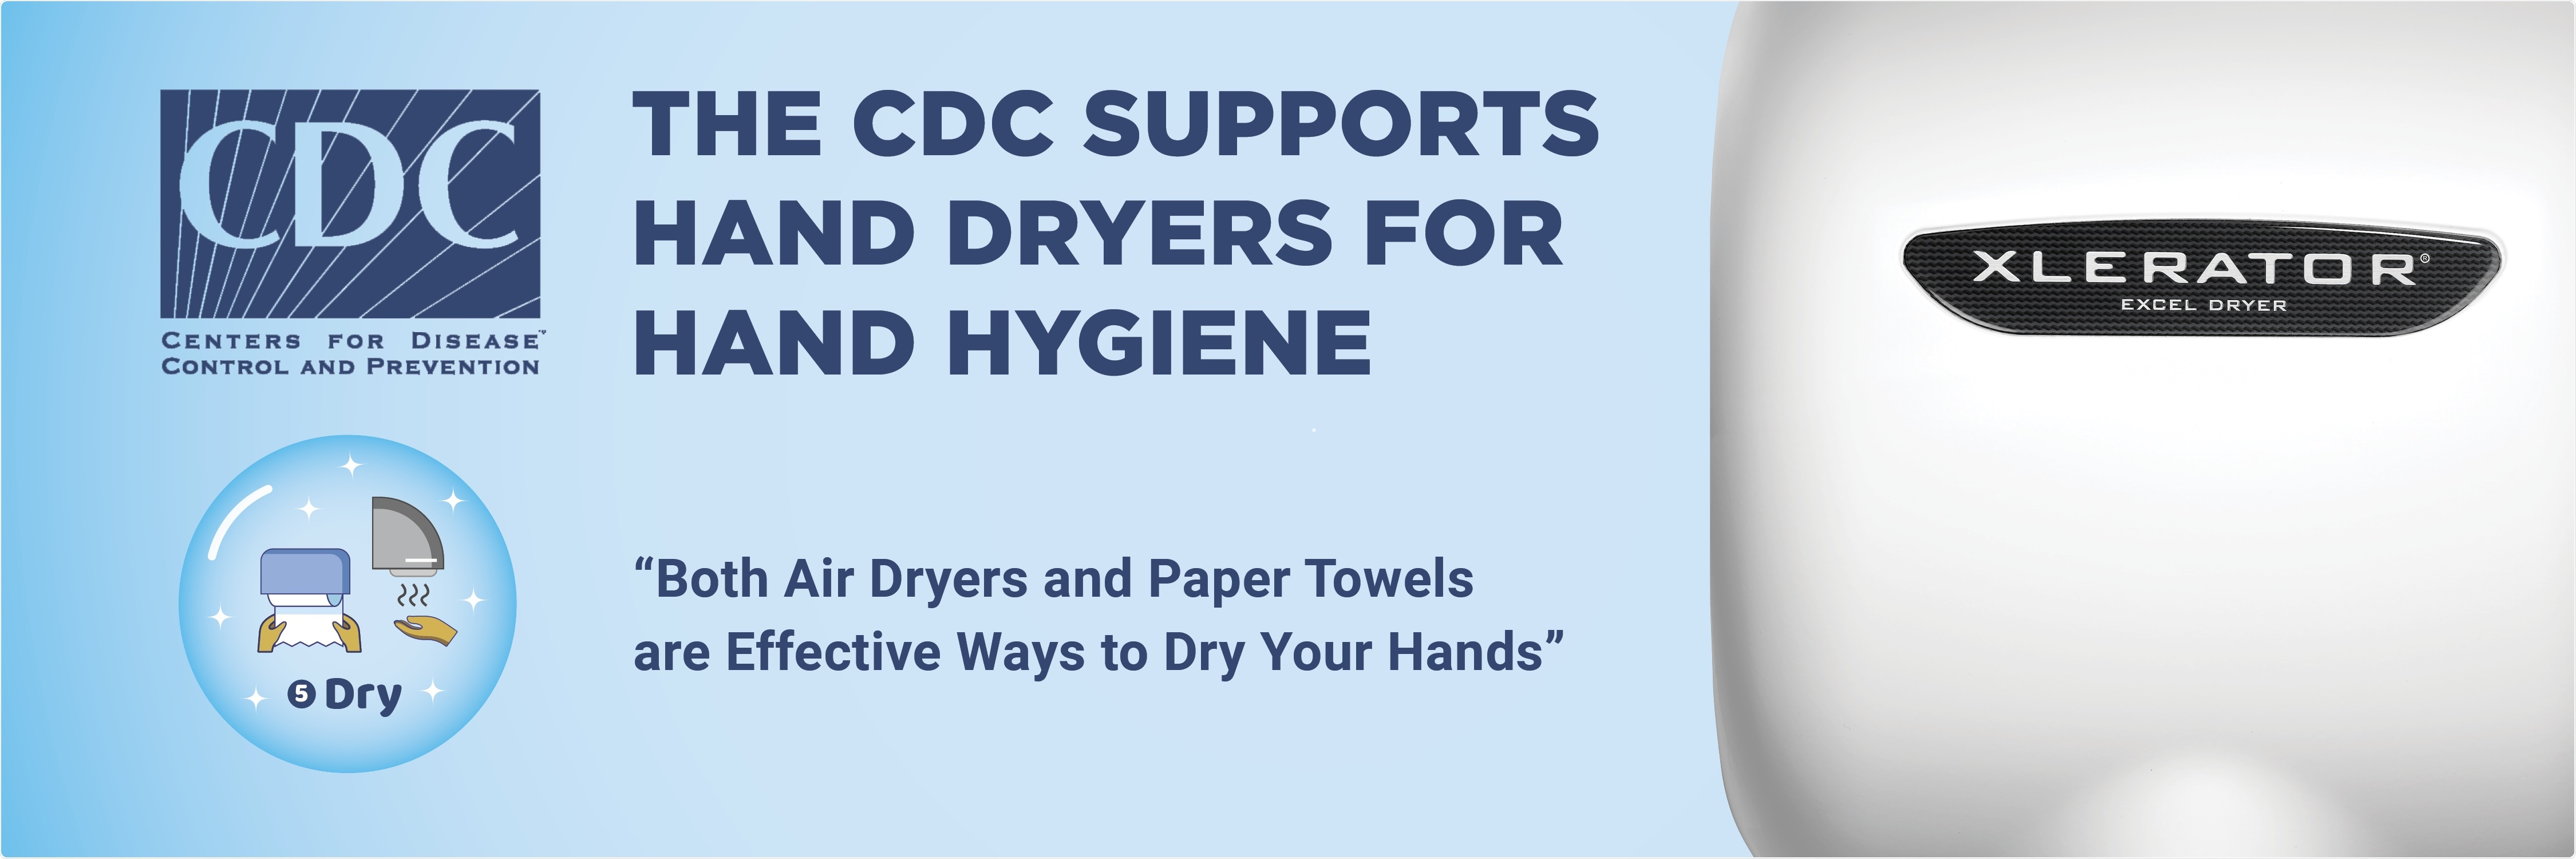 Updated CDC guidelines support the use of hand dryers for hand hygiene